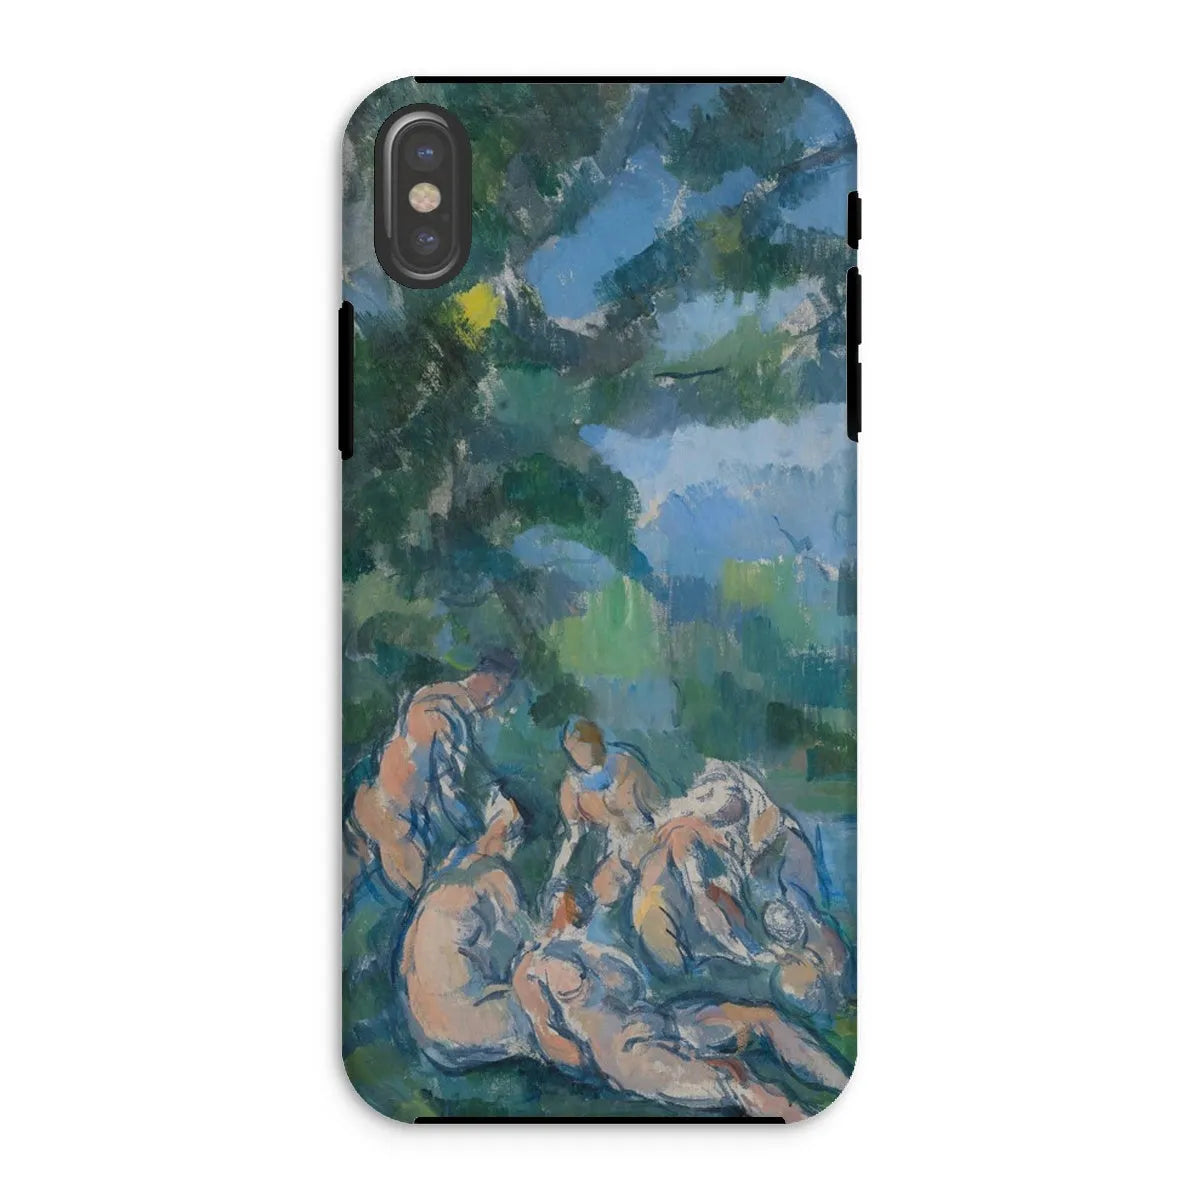 The Bathers - Post-impressionism Phone Case - Paul Cezanne - Iphone Xs / Matte - Mobile Phone Cases - Aesthetic Art